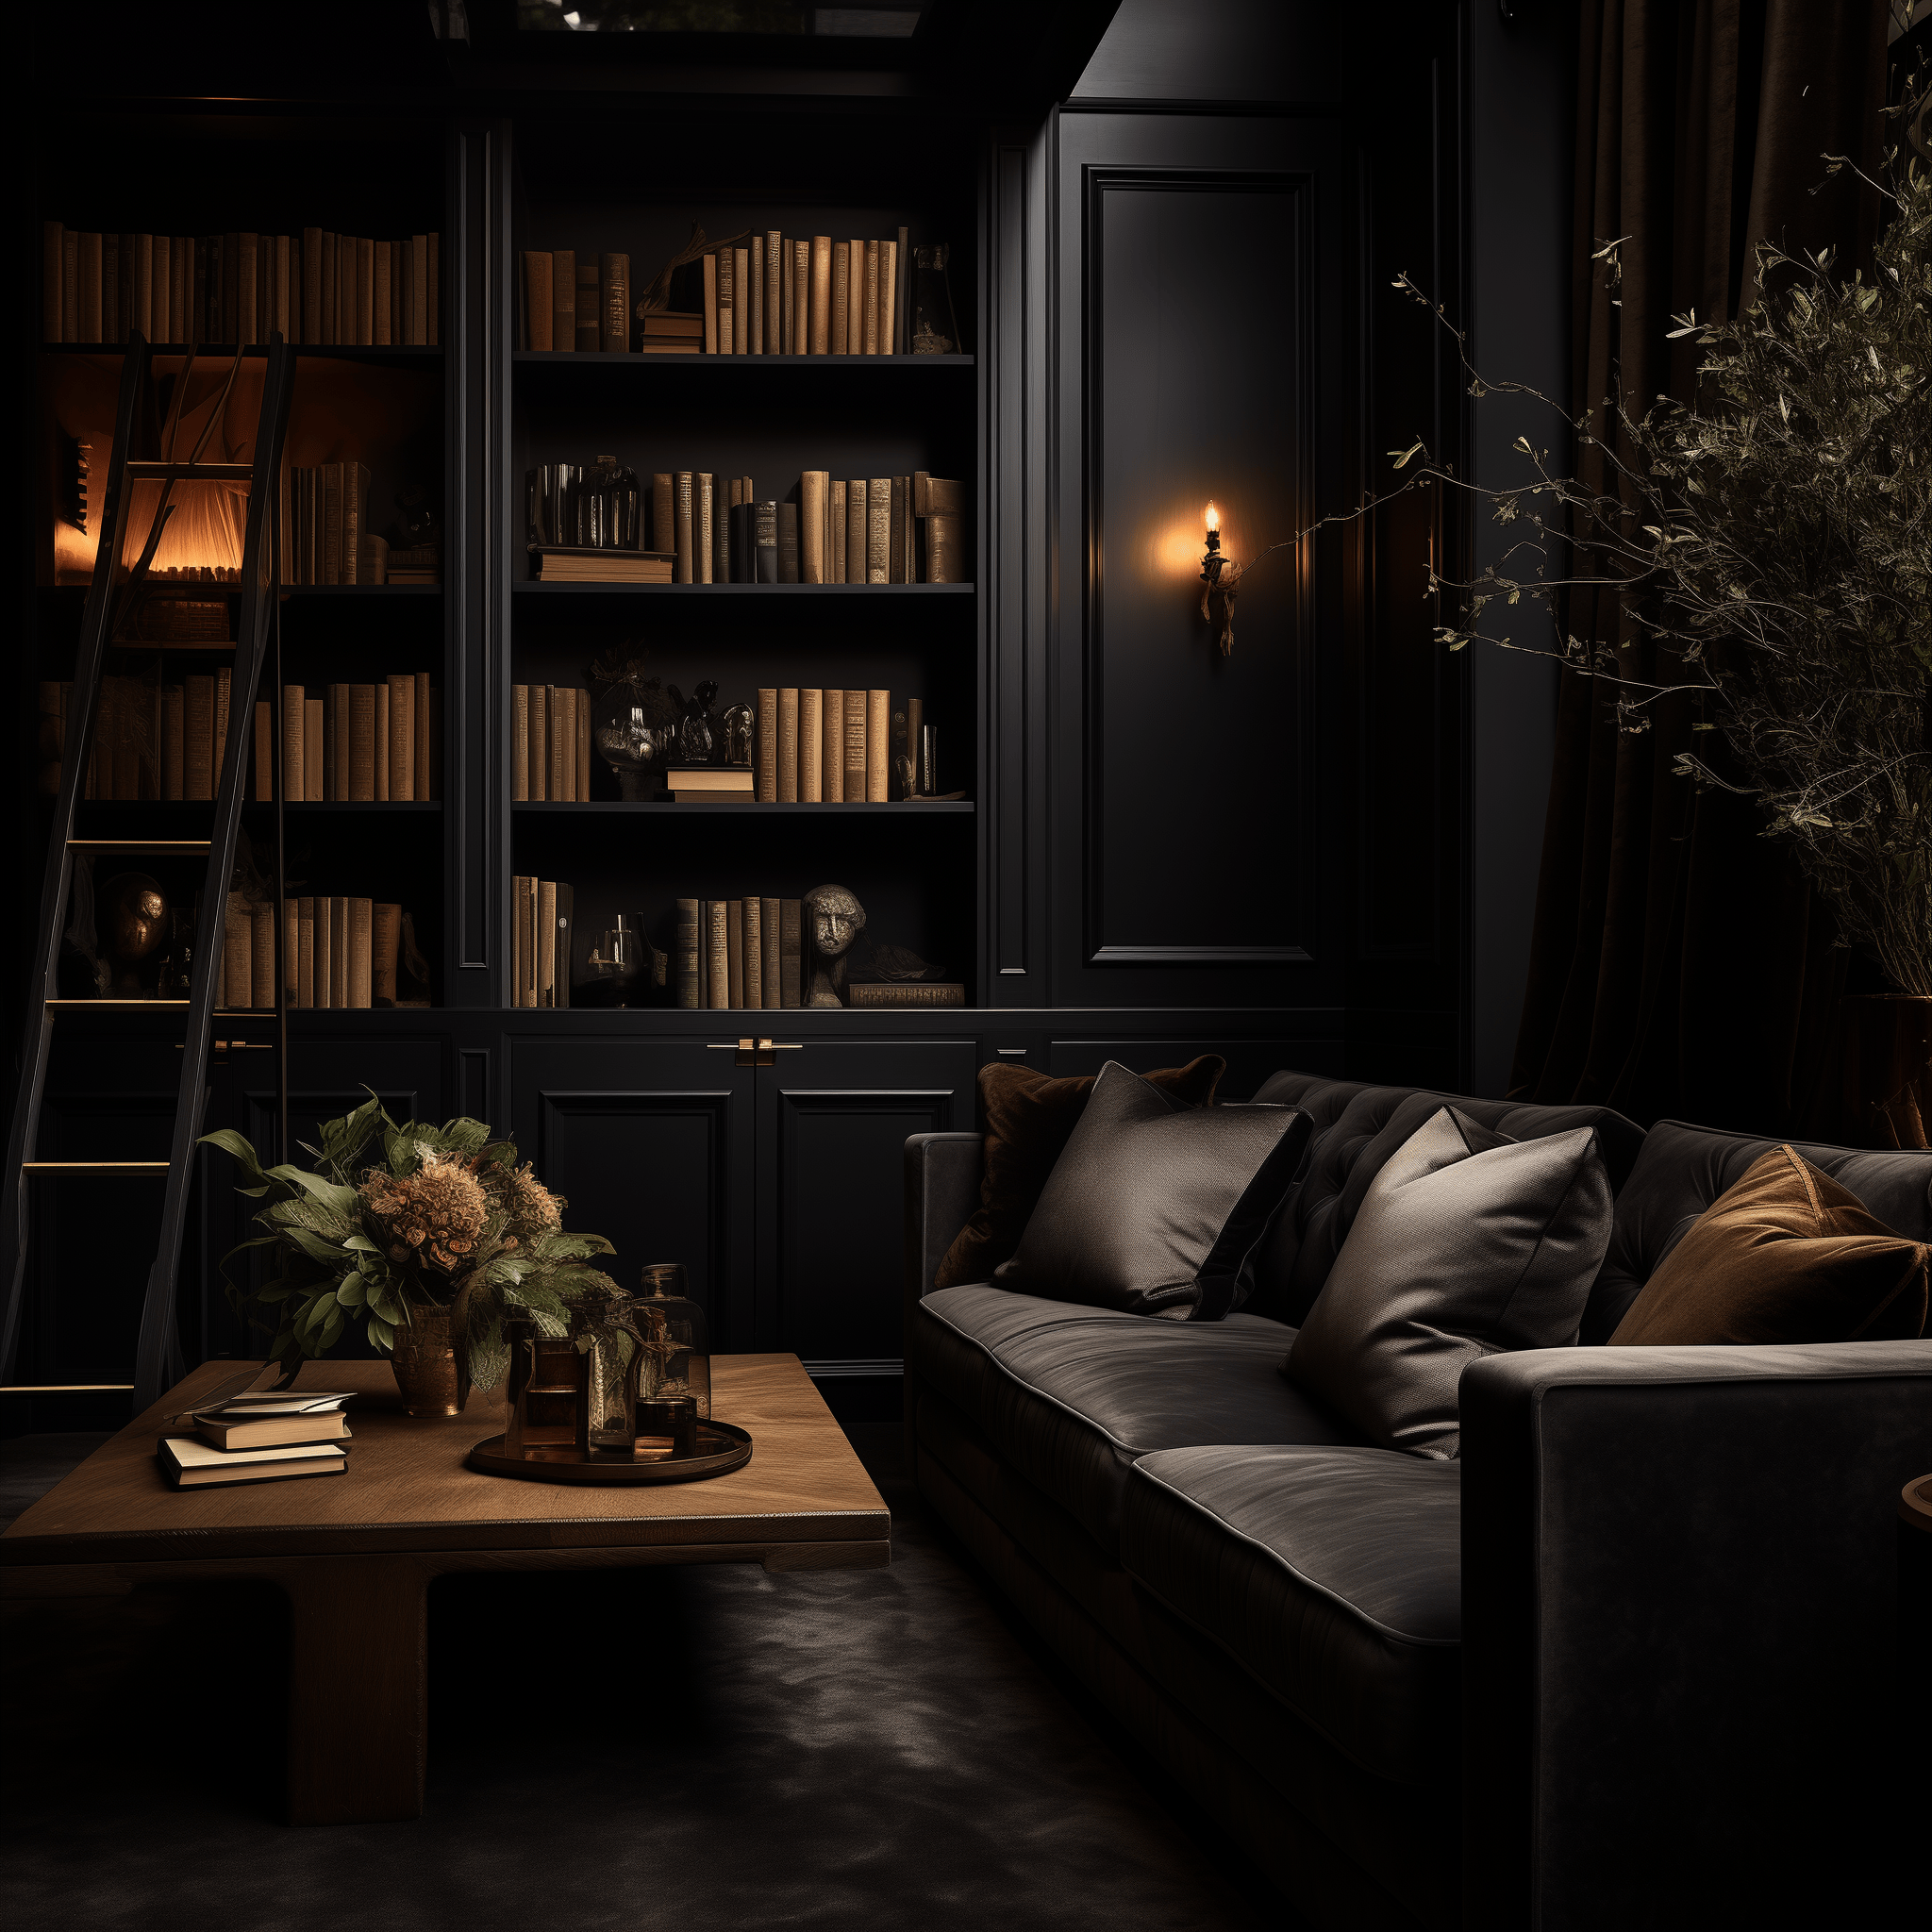 Cozy and dark living room, photographed from an eye-level angle, highlighting luxurious textiles and architectural elegance.